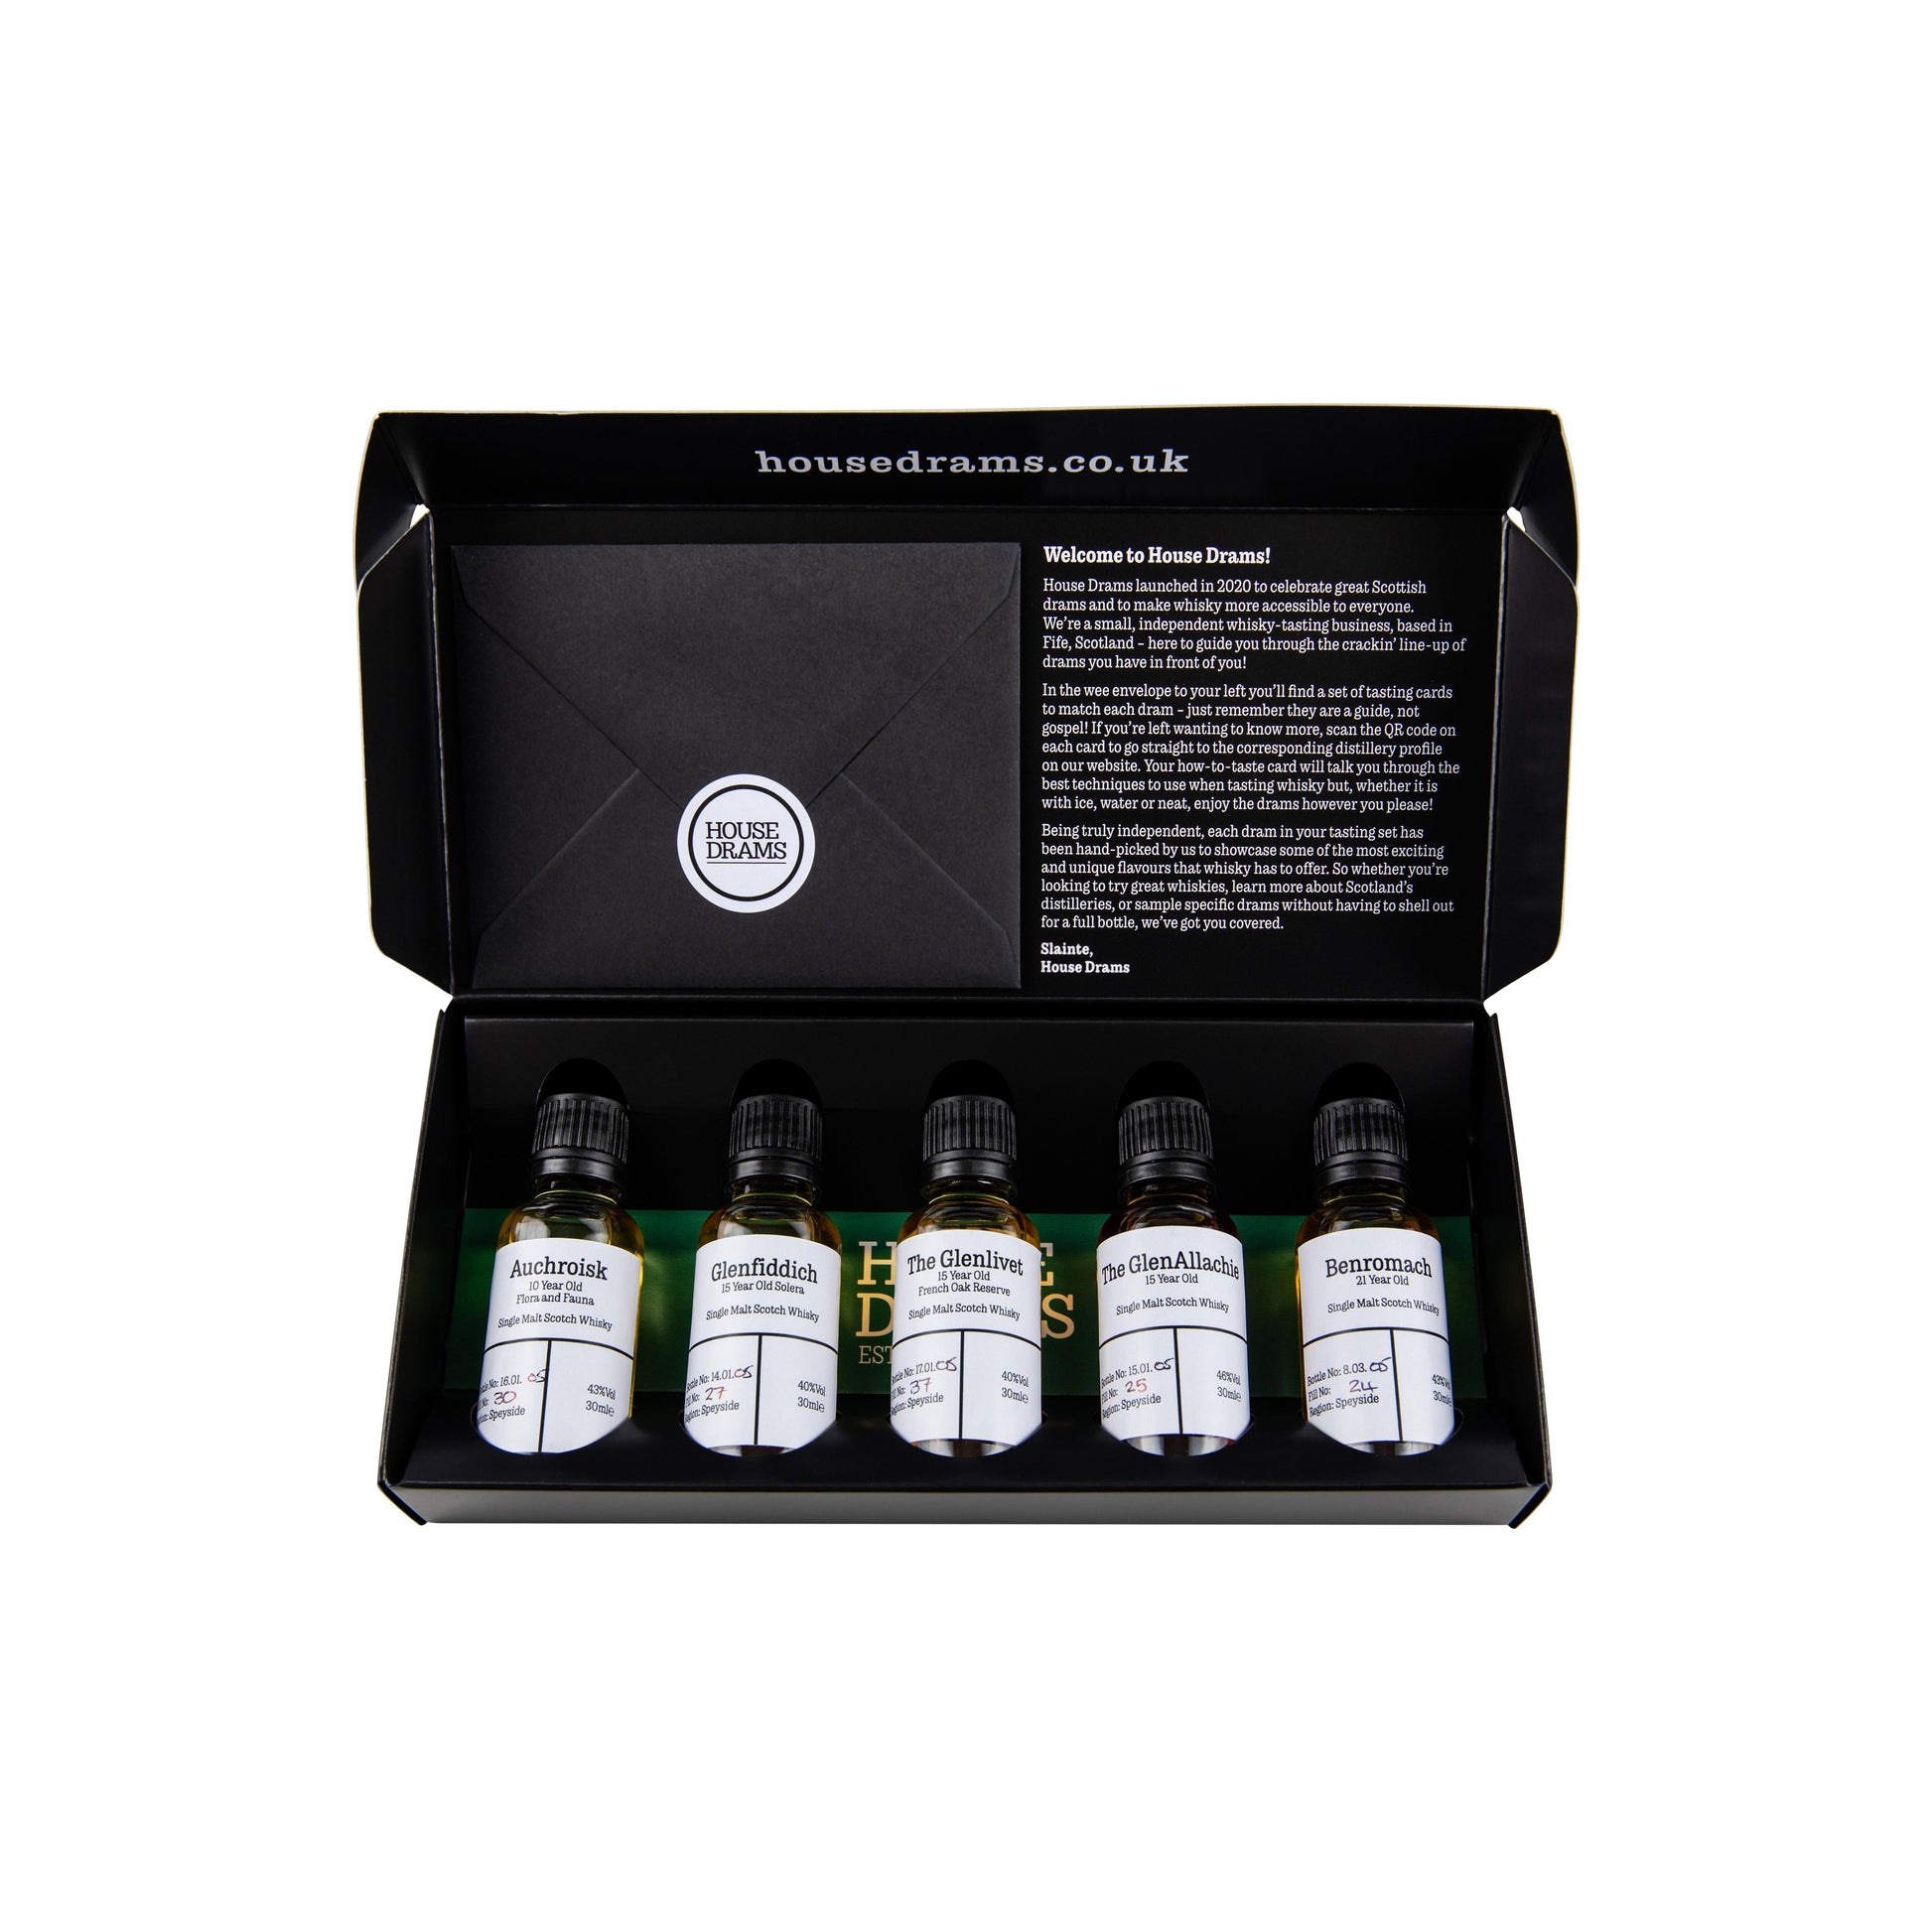 House Drams Whisky Tasting Set - Classic Speyside? (5x30ml) - Single Malt Scotch Whisky-Single Malt Scotch Whisky-Fountainhall Wines